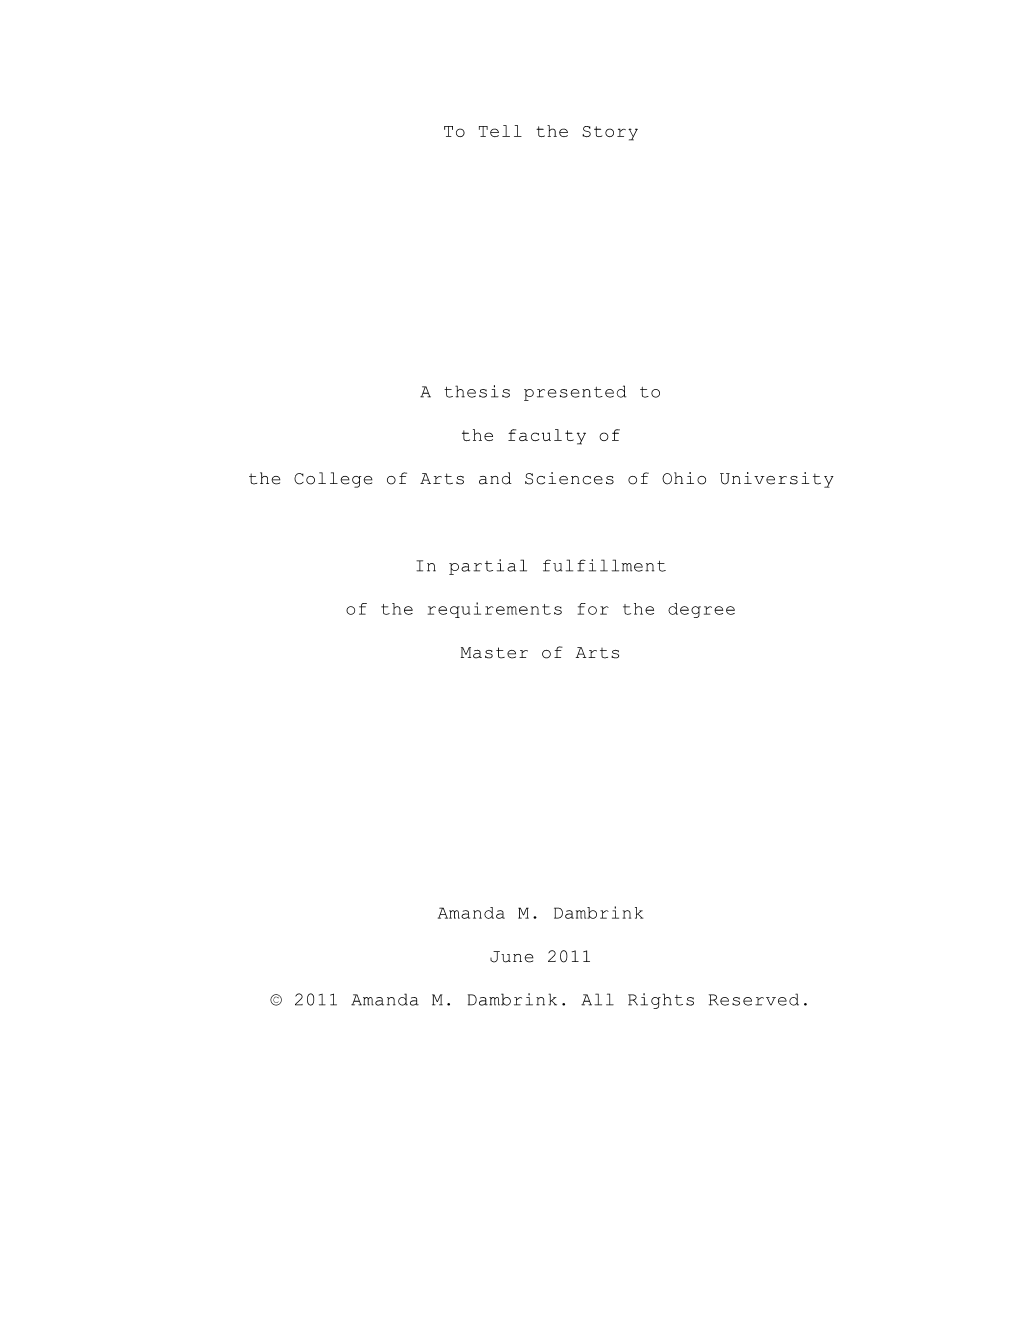 To Tell the Story a Thesis Presented to the Faculty of the College of Arts And